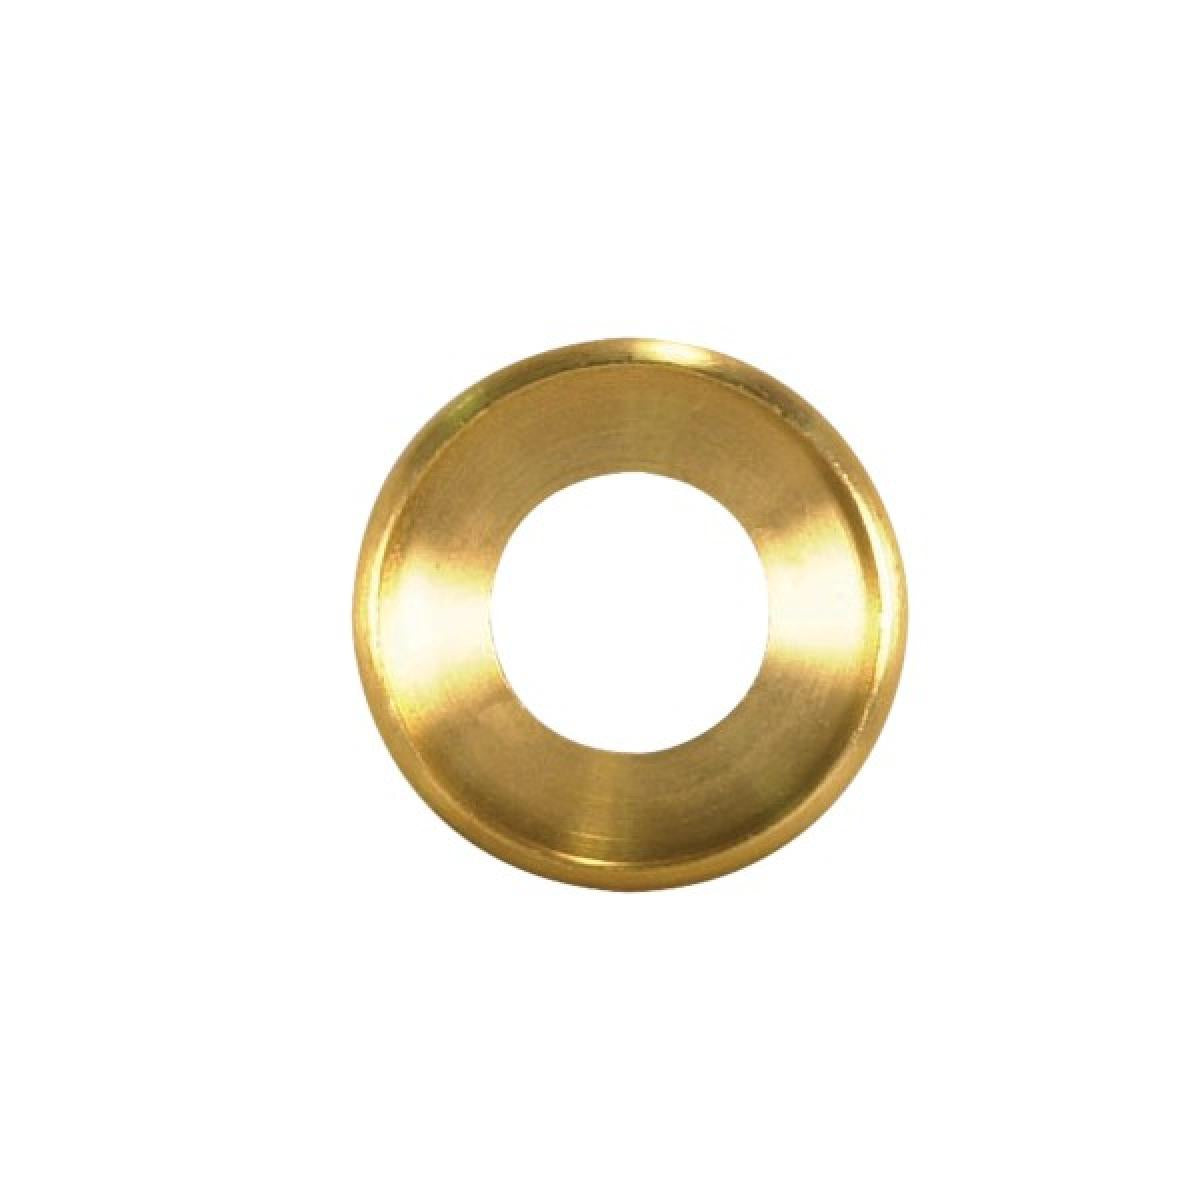 Satco 90-1619 Turned Brass Check Ring 1/4 IP Slip Unfinished 1-7/8" Diameter